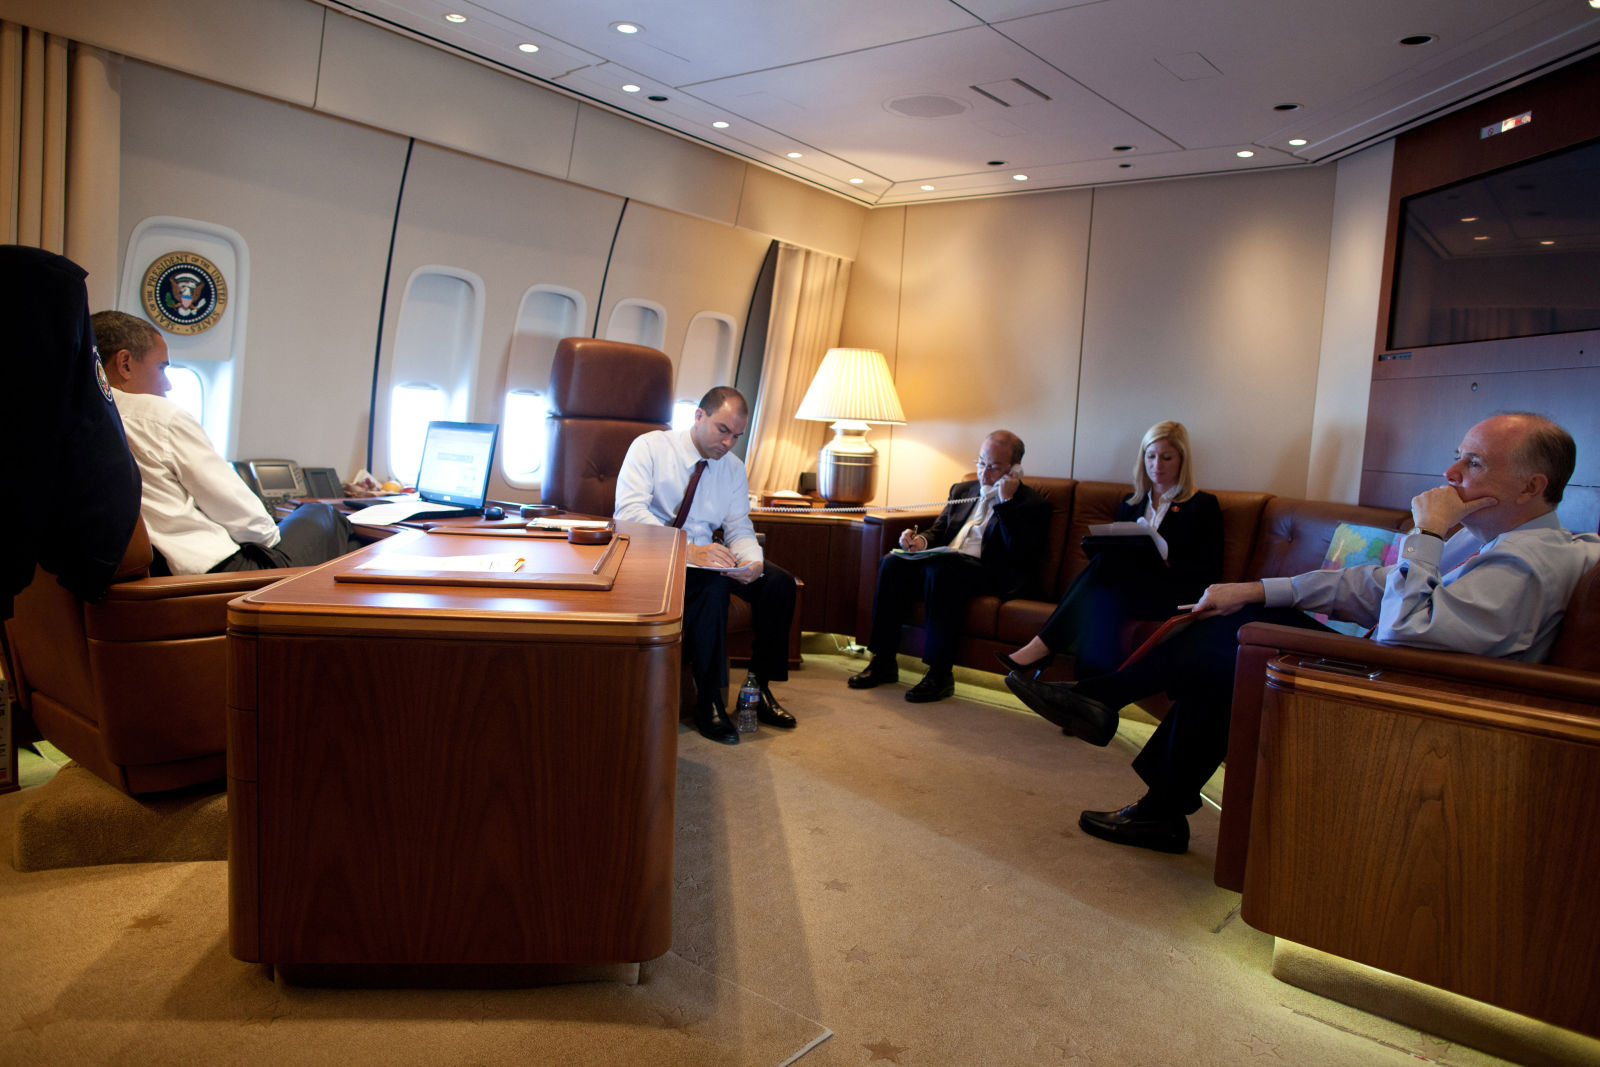 President Obama holds a meeting in the airborne Oval Office in 2011. (White House)